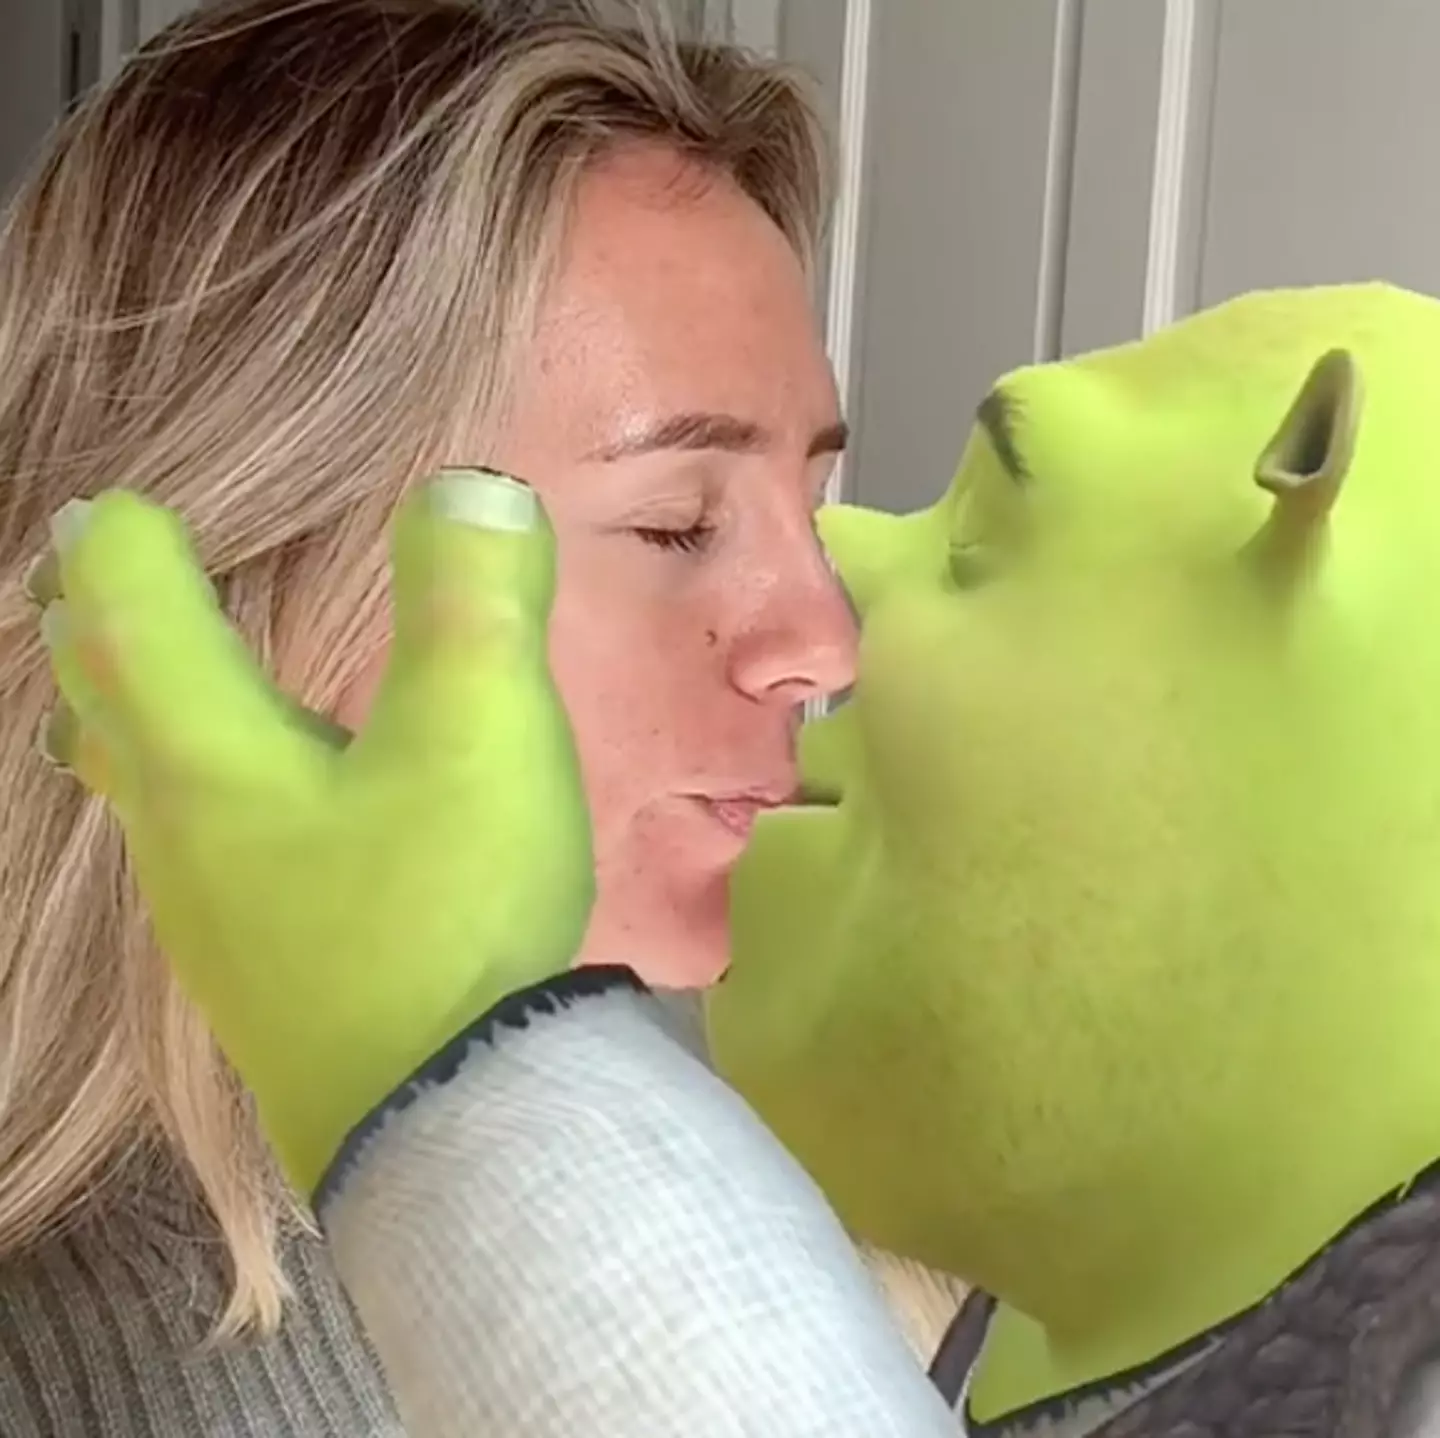 The 'Shrek kissing filter' TikTok trend is the weirdest thing you'll see all day